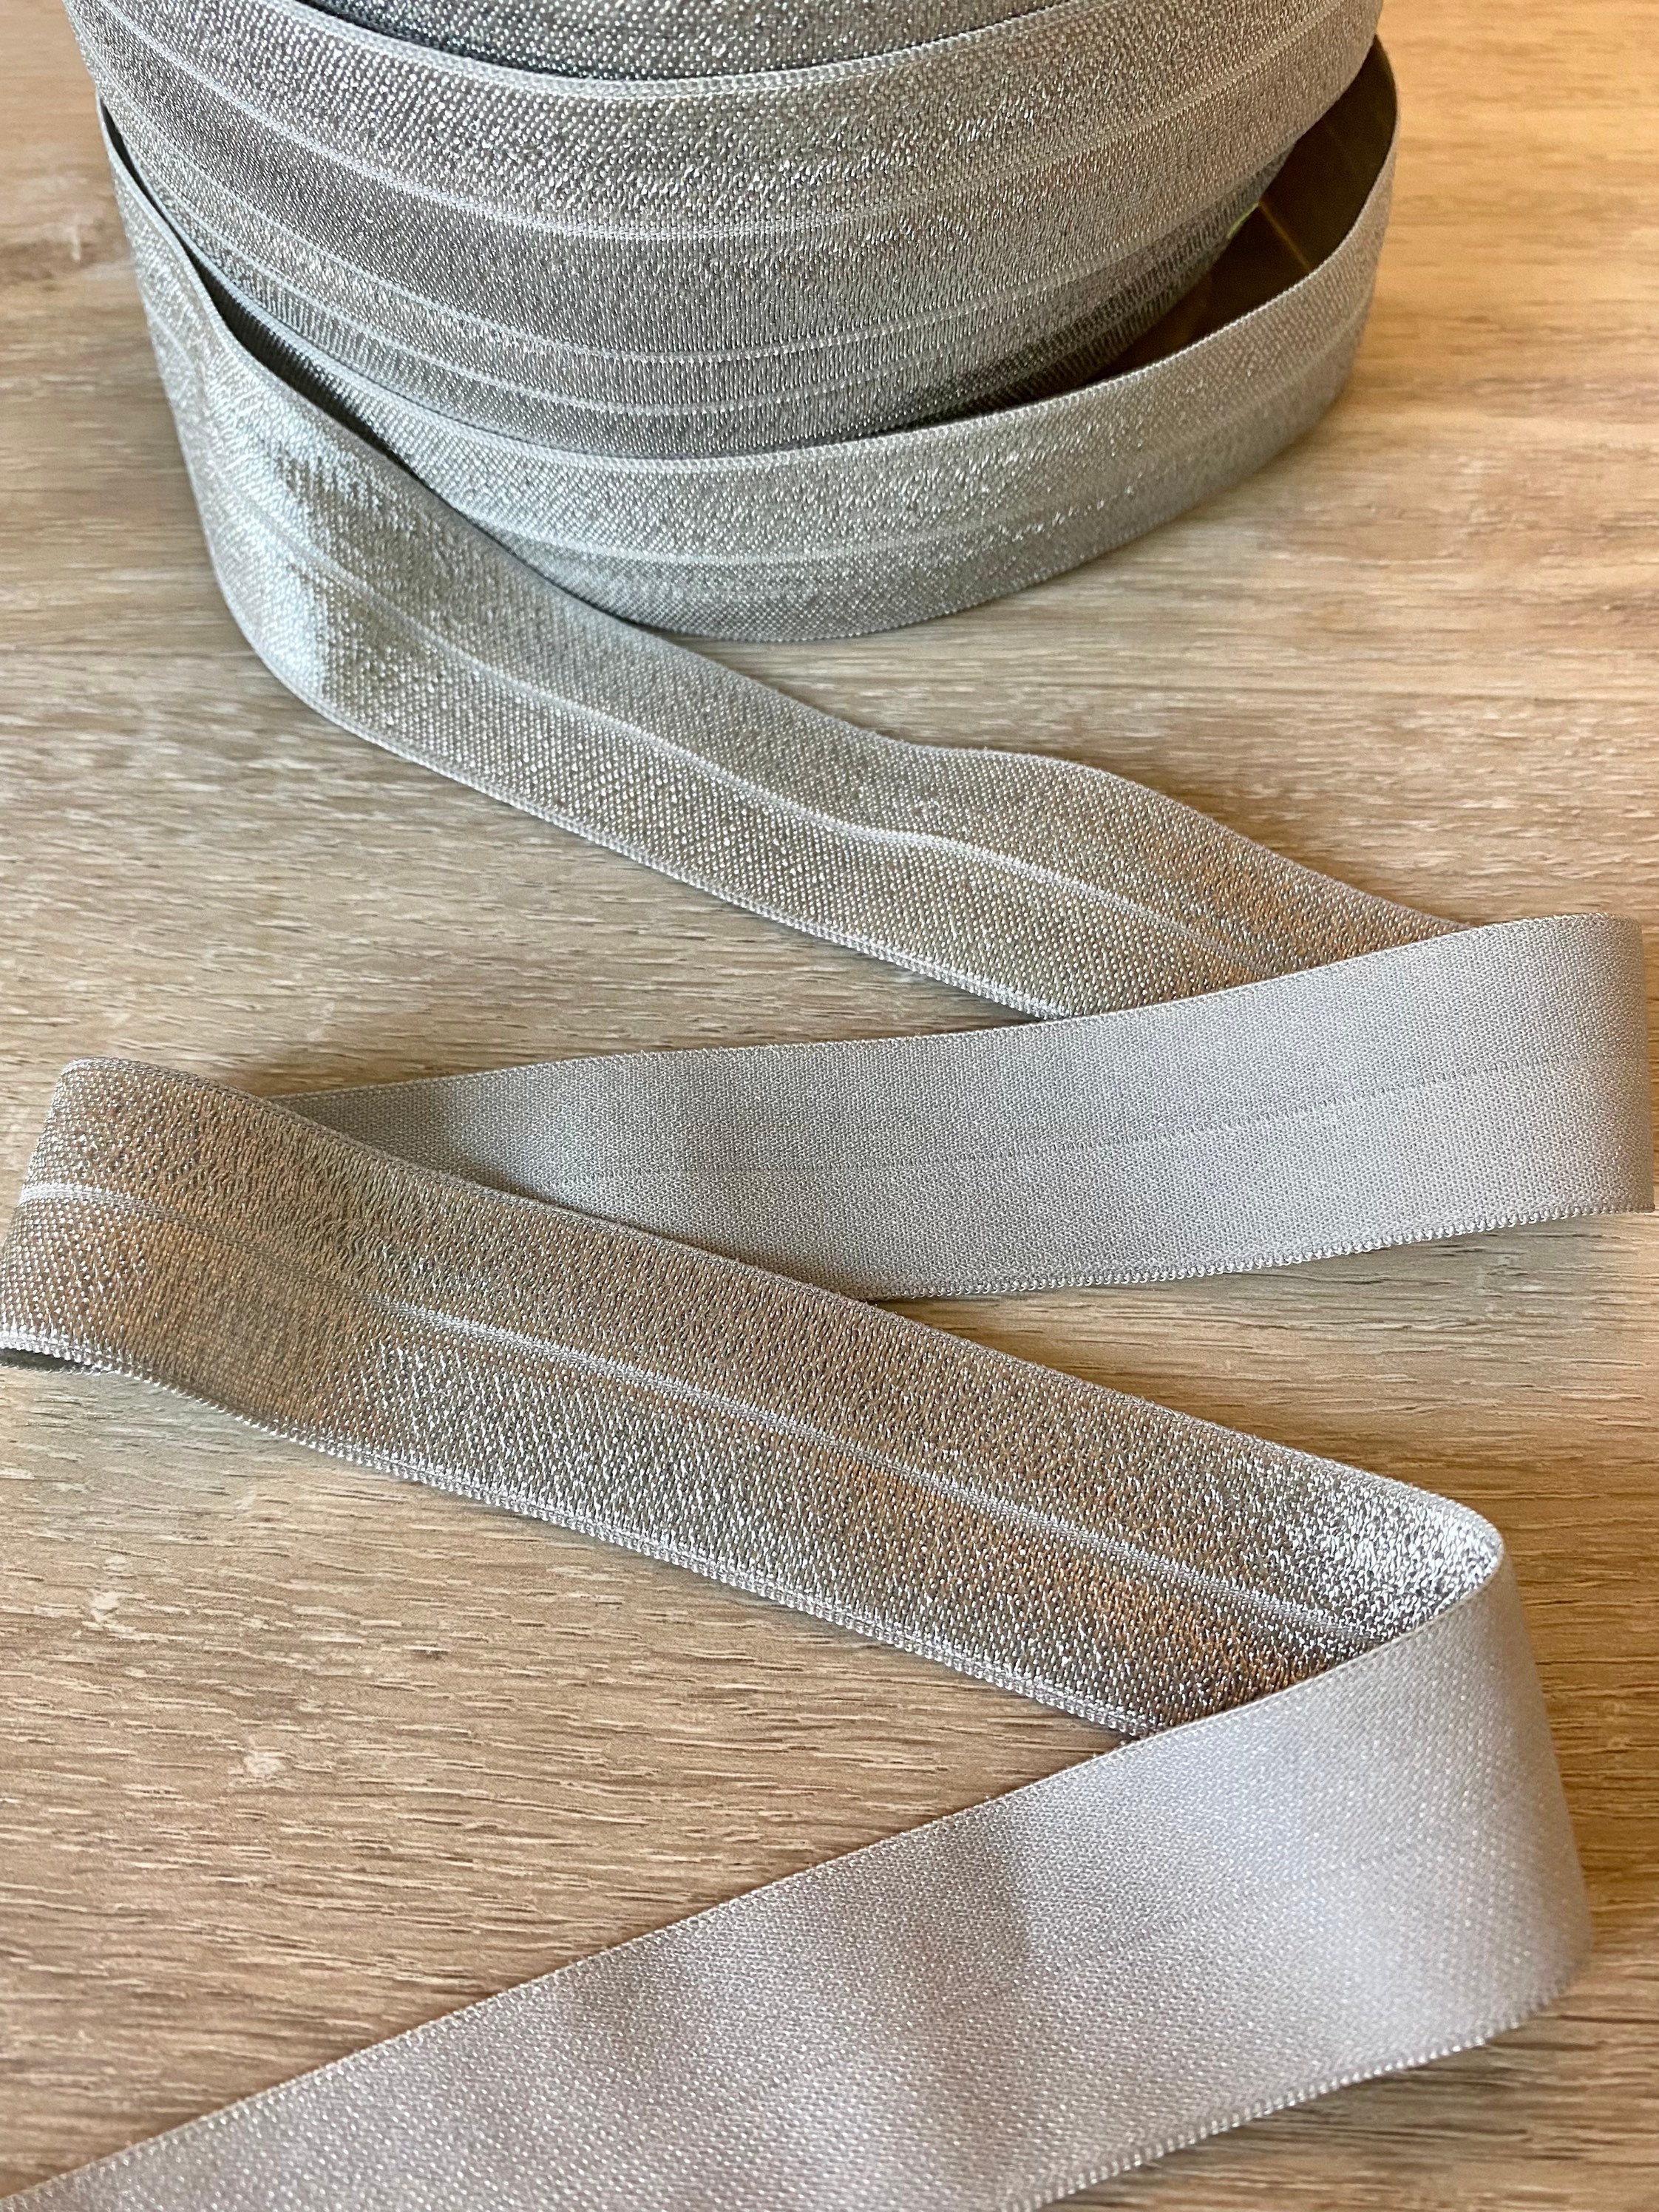 One Inch Silver Fold Over Elastic Silver 1 Elastic for Headbands and Sewing  Projects FOE Baby Headbands Headband Supplies 